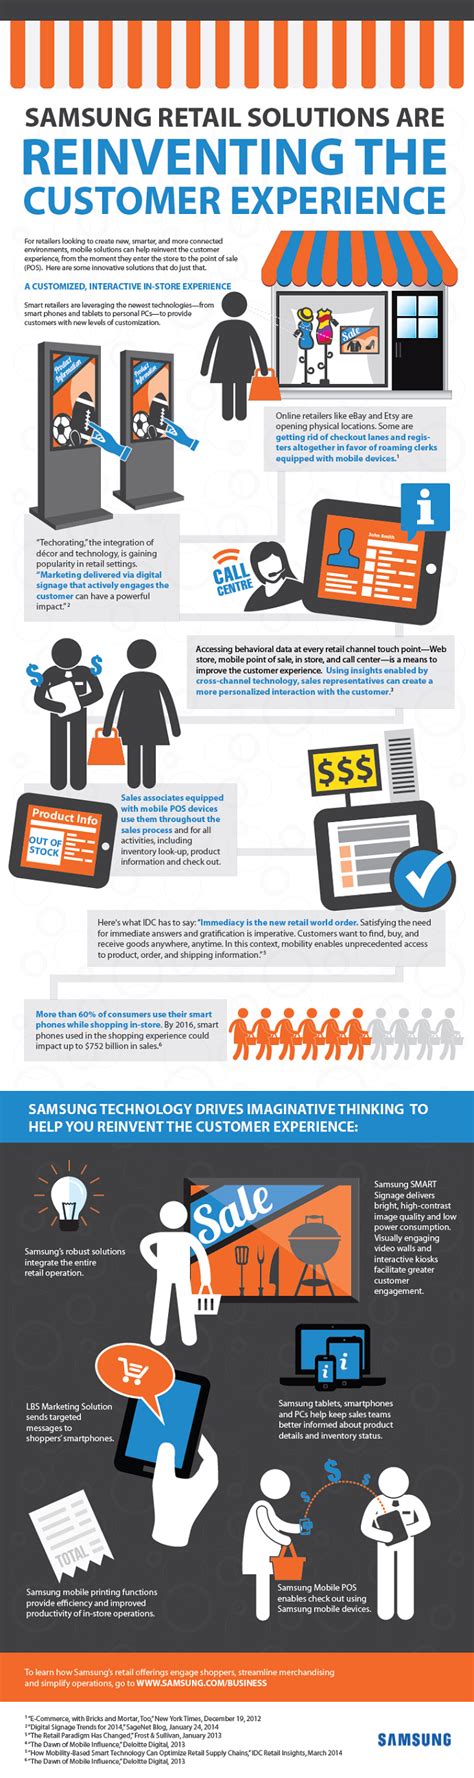 Infographic Samsung Retail Solutions Are Reinventing Customer